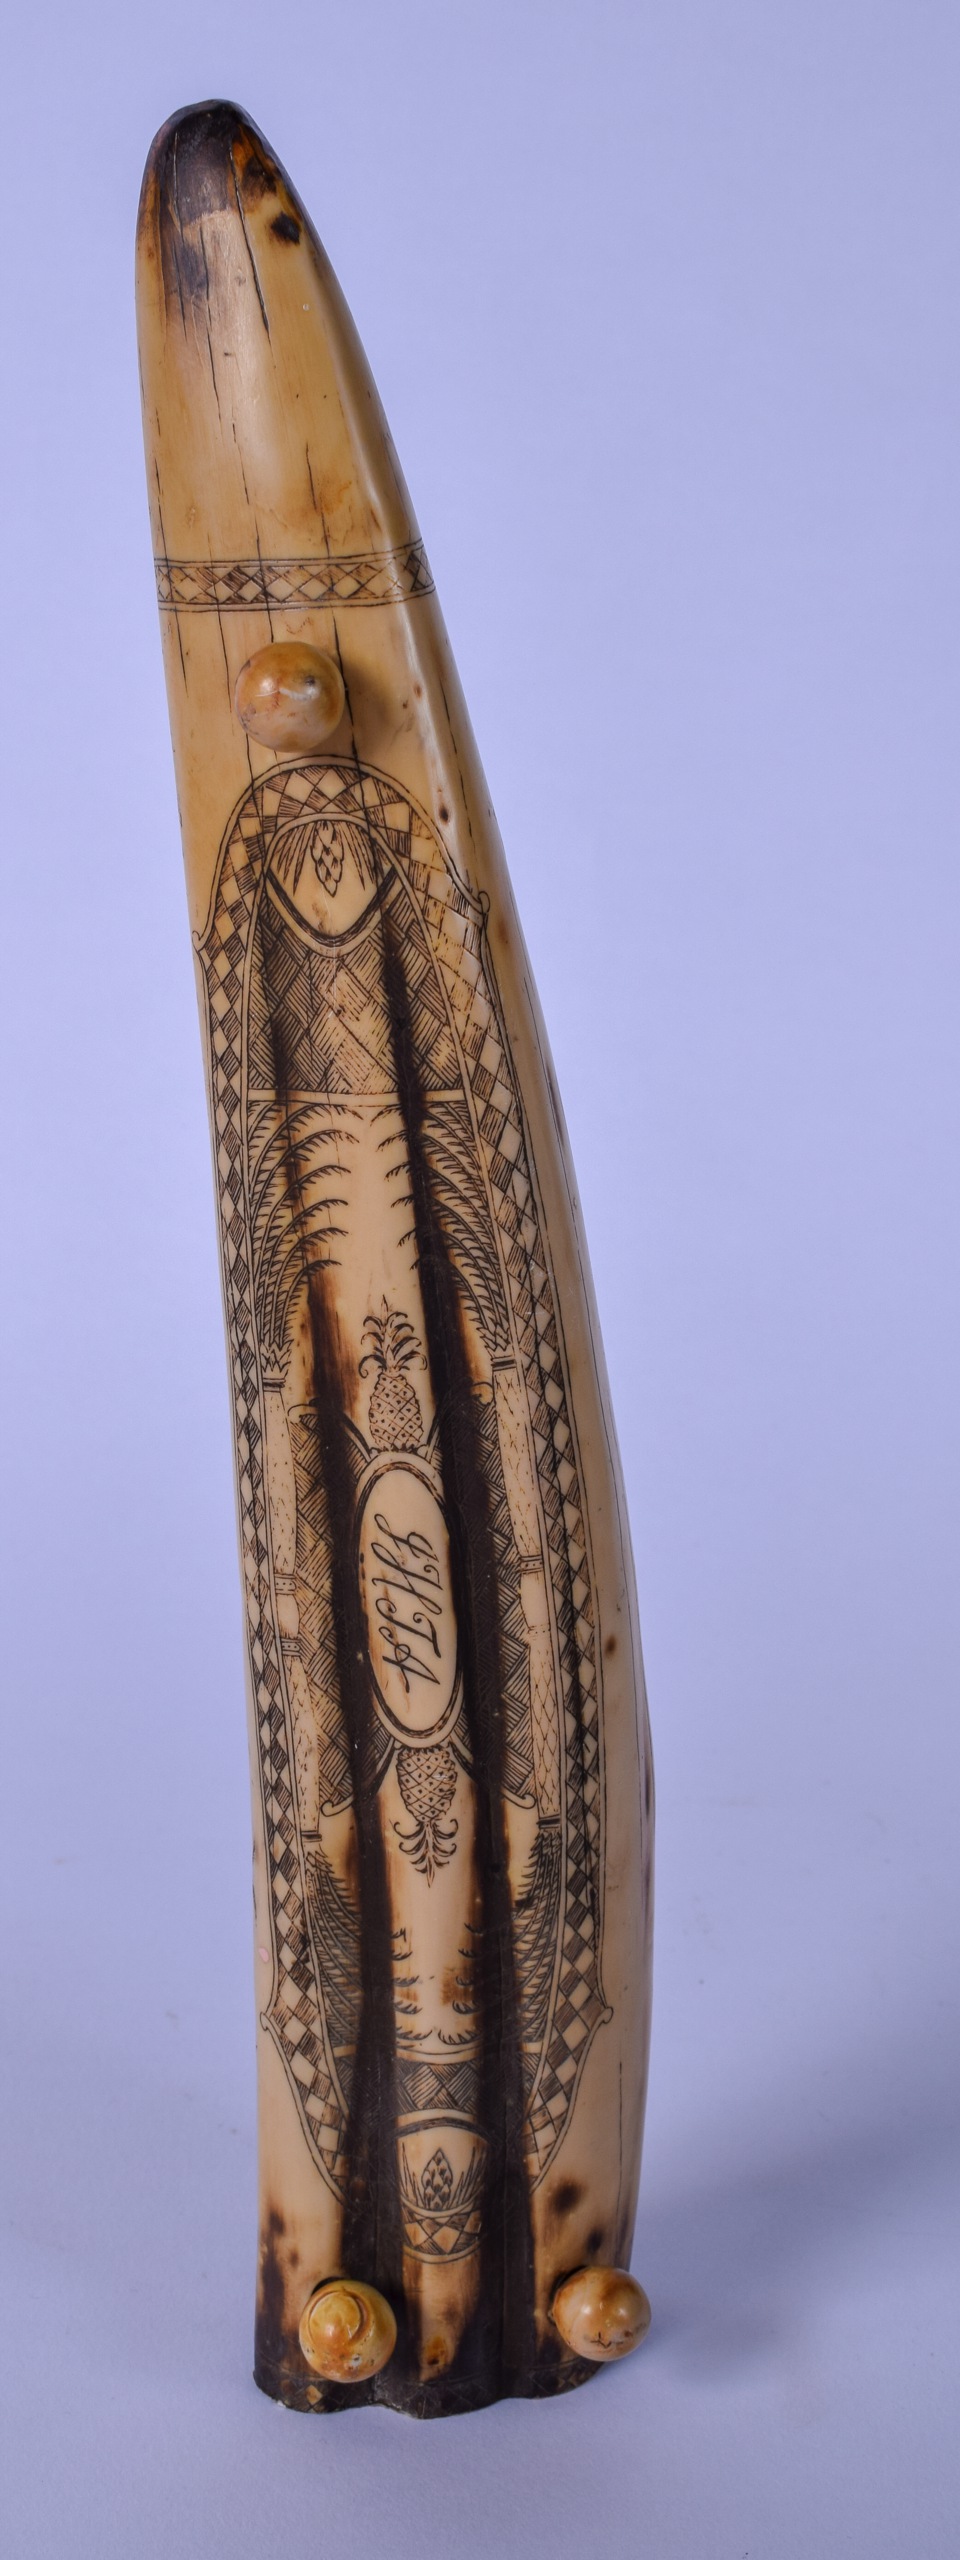 AN IVORINE SCRIMSHAW CRIBBAGE BOARD, decorated with a grand house and palm trees. 32 cm high. - Image 3 of 3